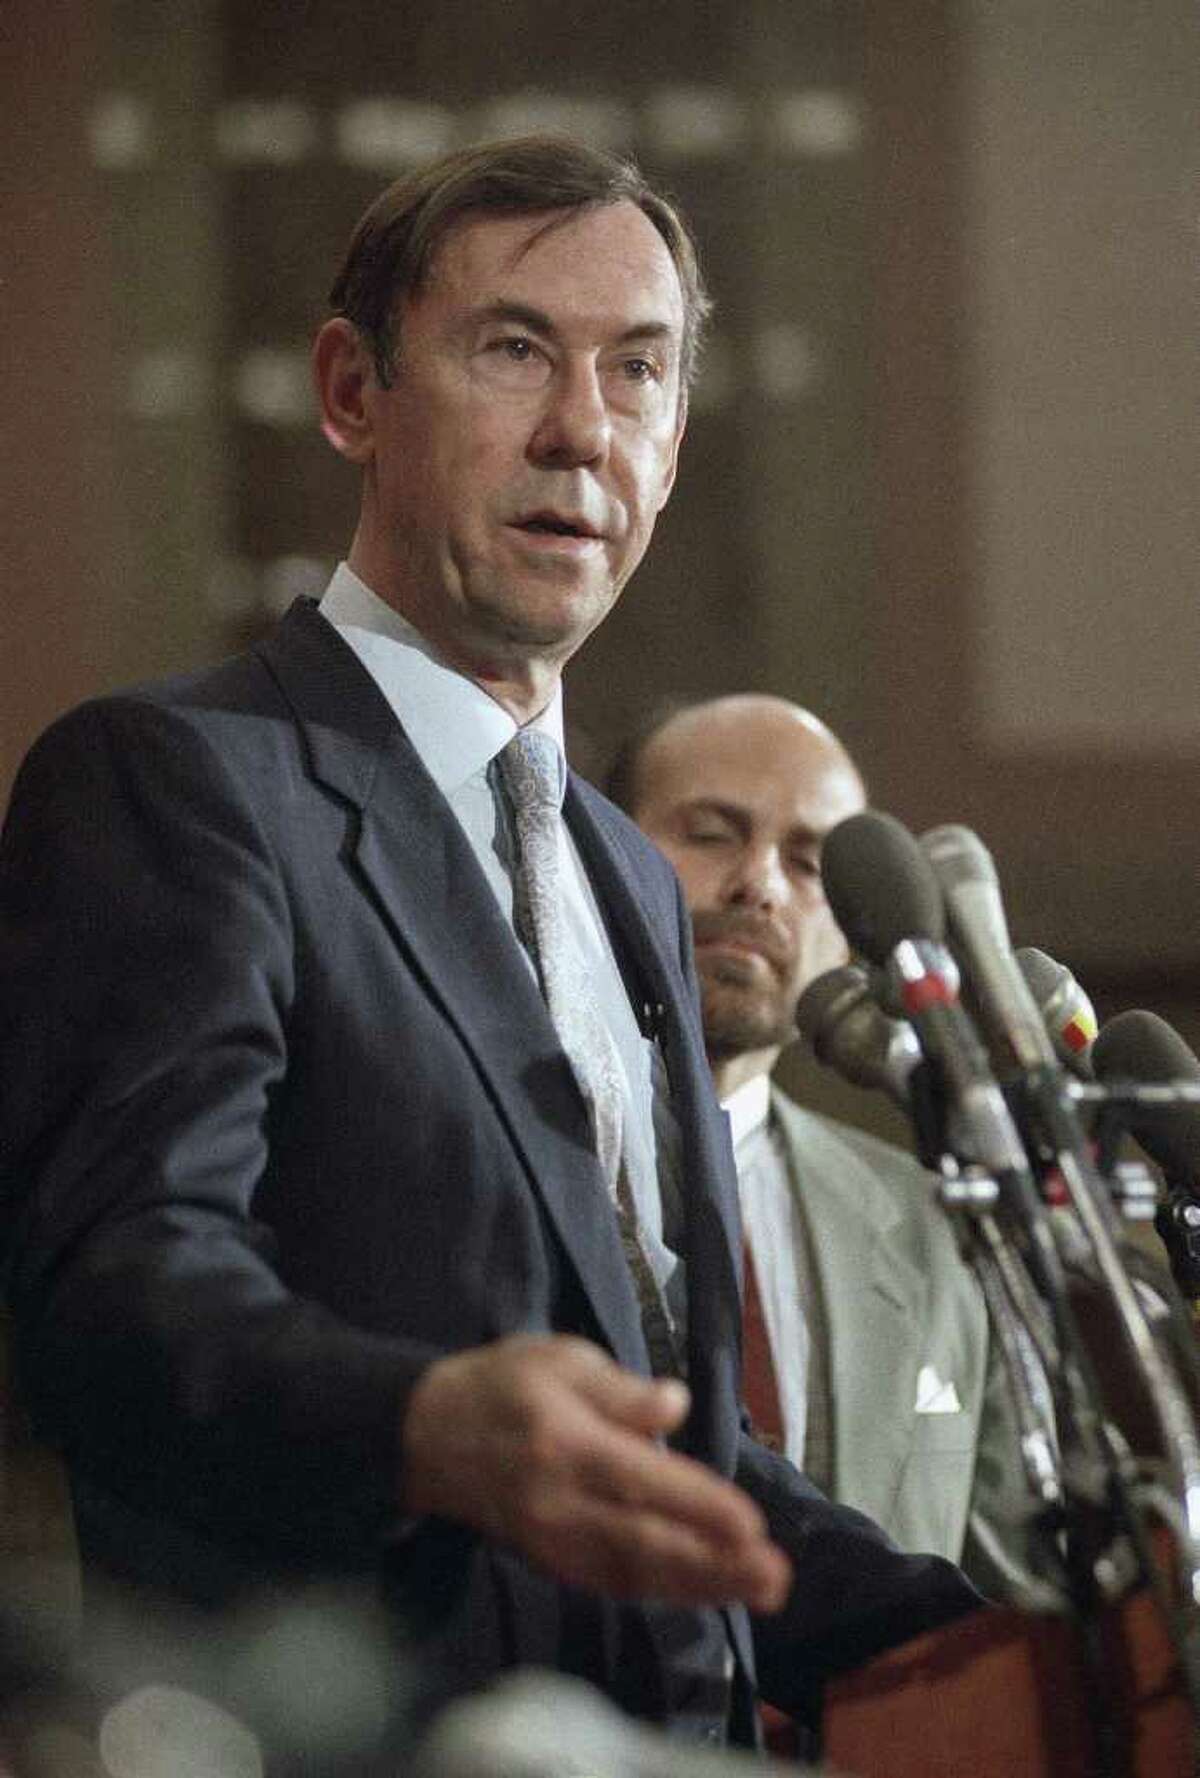 Gary Sick, left, former Carter administration official, and Barry Rosen, a former U.S. embassy hostage in Iran, meet with reporters prior to a conference on hostages in Washington on Thursday, June 13, 1991. The conference is looking into allegations that the 1980 Reagan campaign arranged to delay the release of American hostages from Iran. (AP Photo/John Duricka)